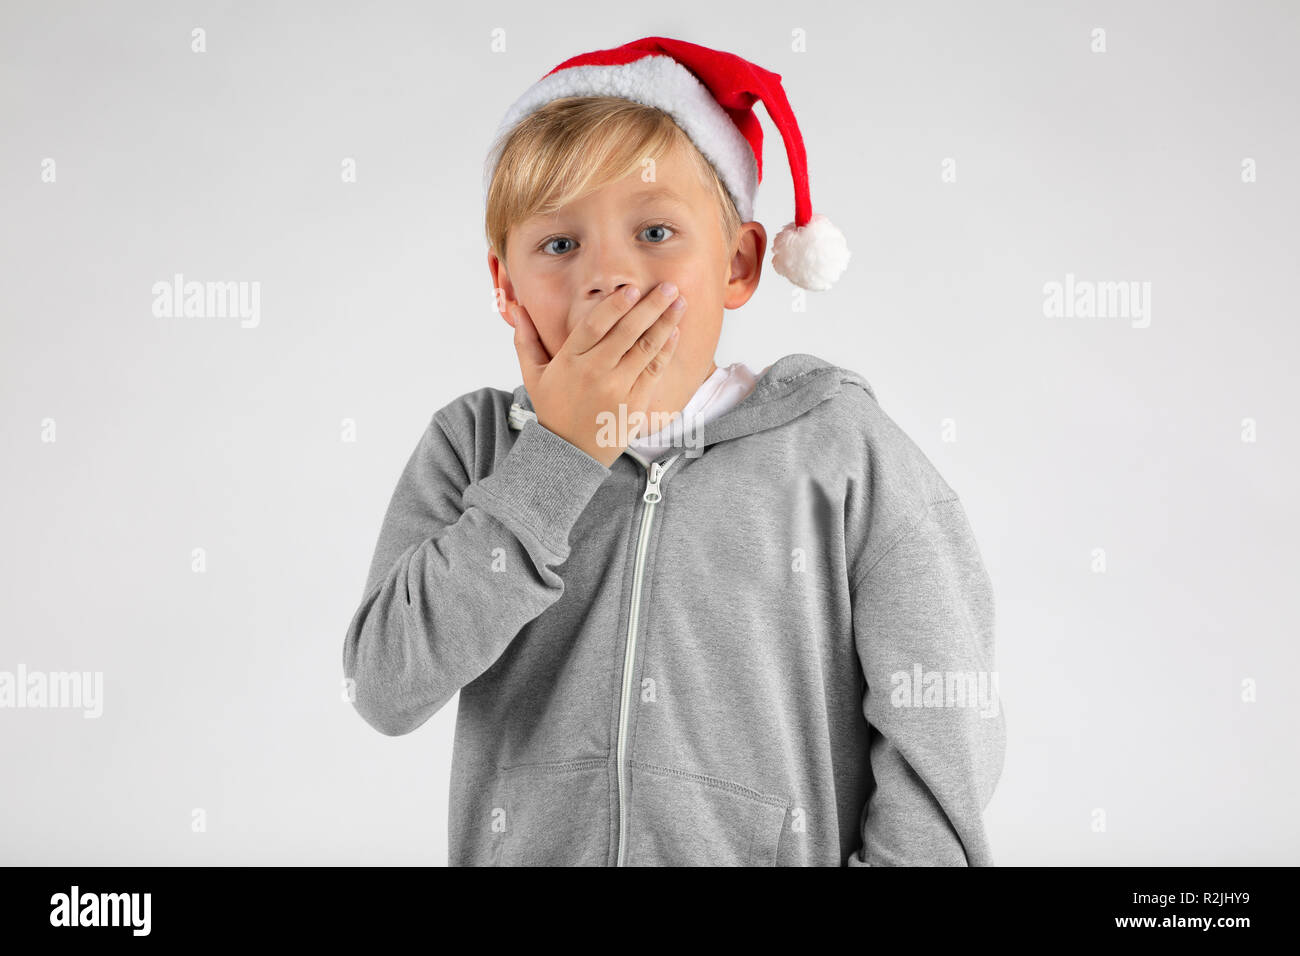 little blond boy with a santa hat is surprised and is covering his mouth with one hand Stock Photo